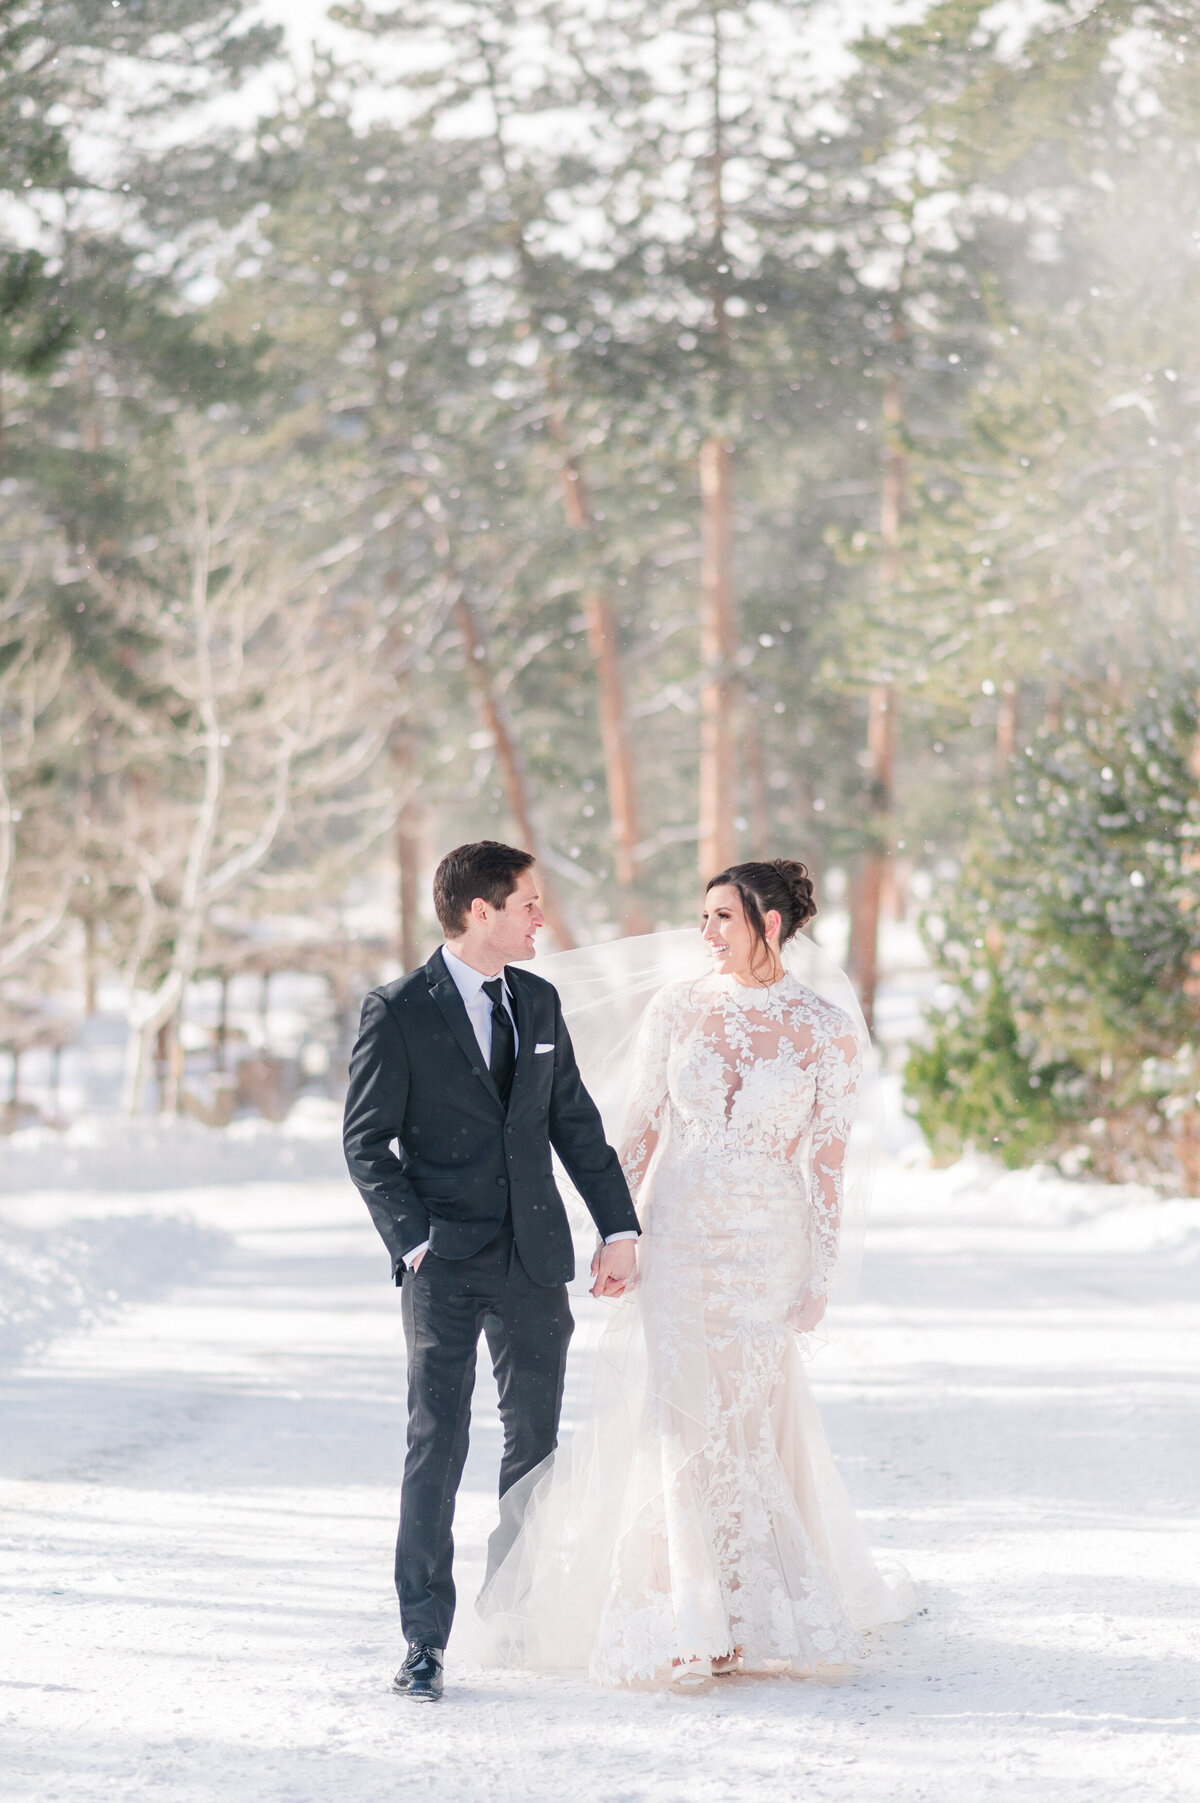 Married couple walking on a snowy road before their wedding ceremony.